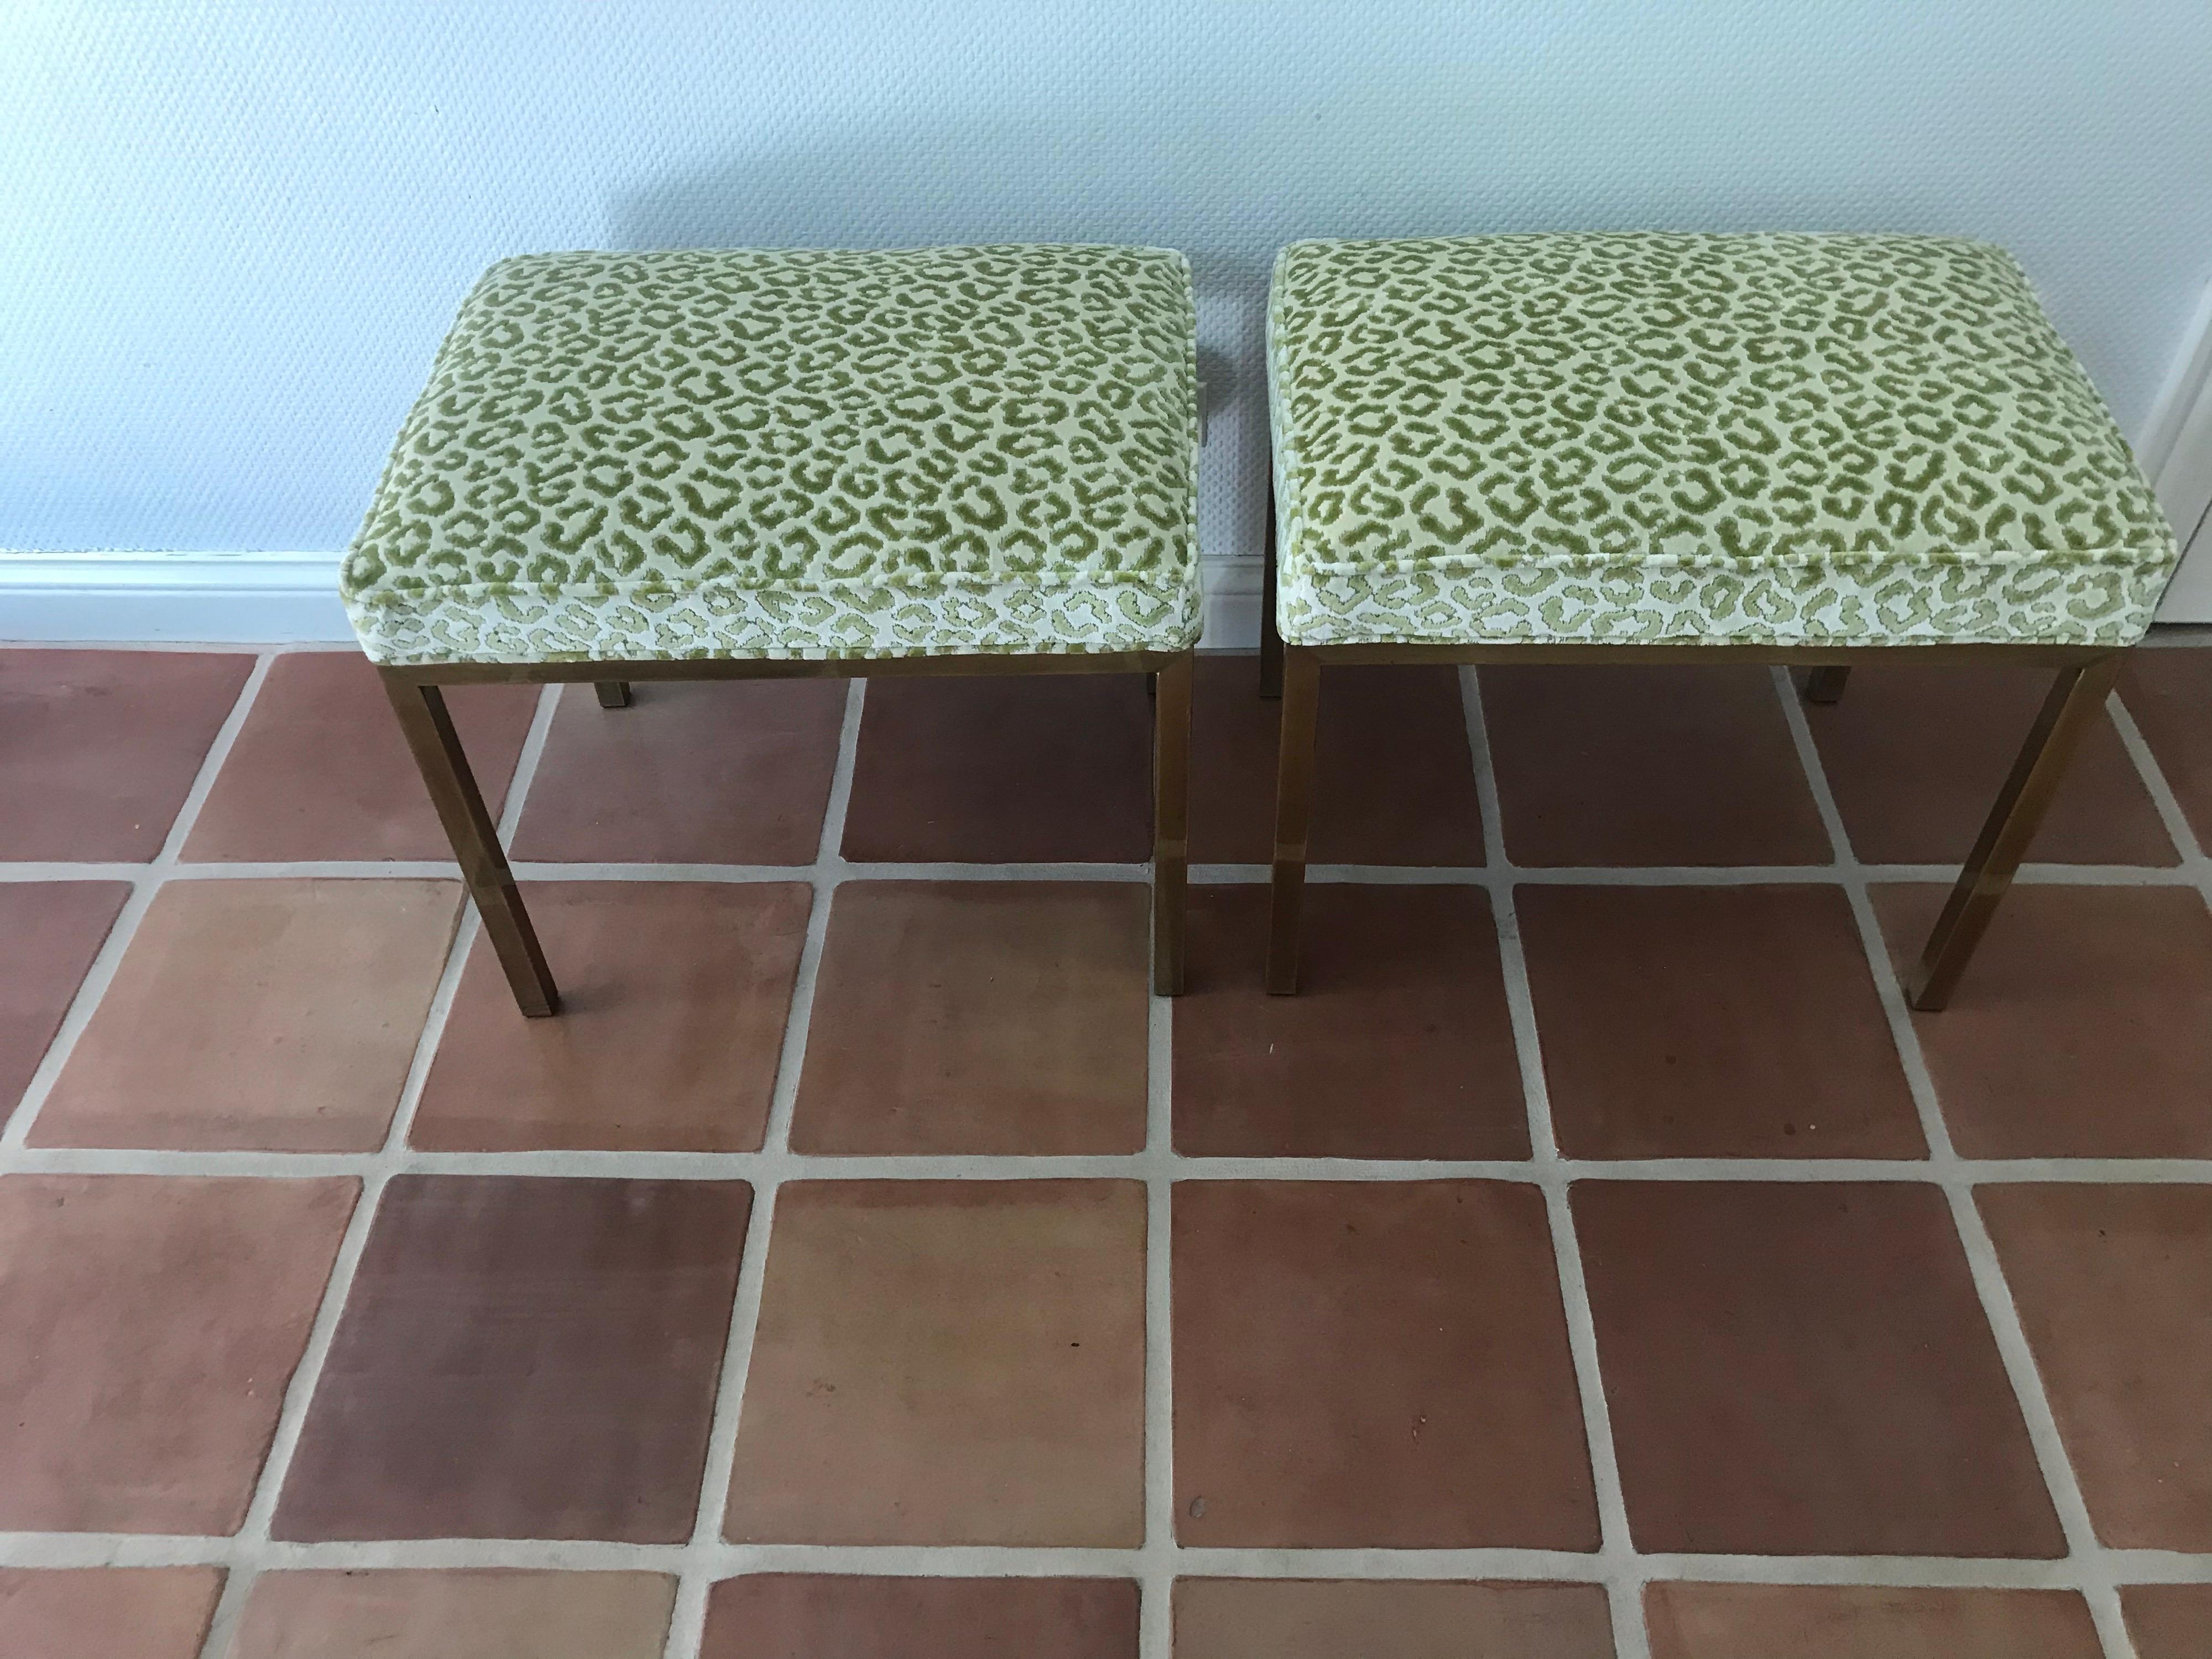 These are a pair of straight lined brass upholstered benches by mastercraft They fit under the brass and glass console but could be used separately 
The designer velvet animal print is new.